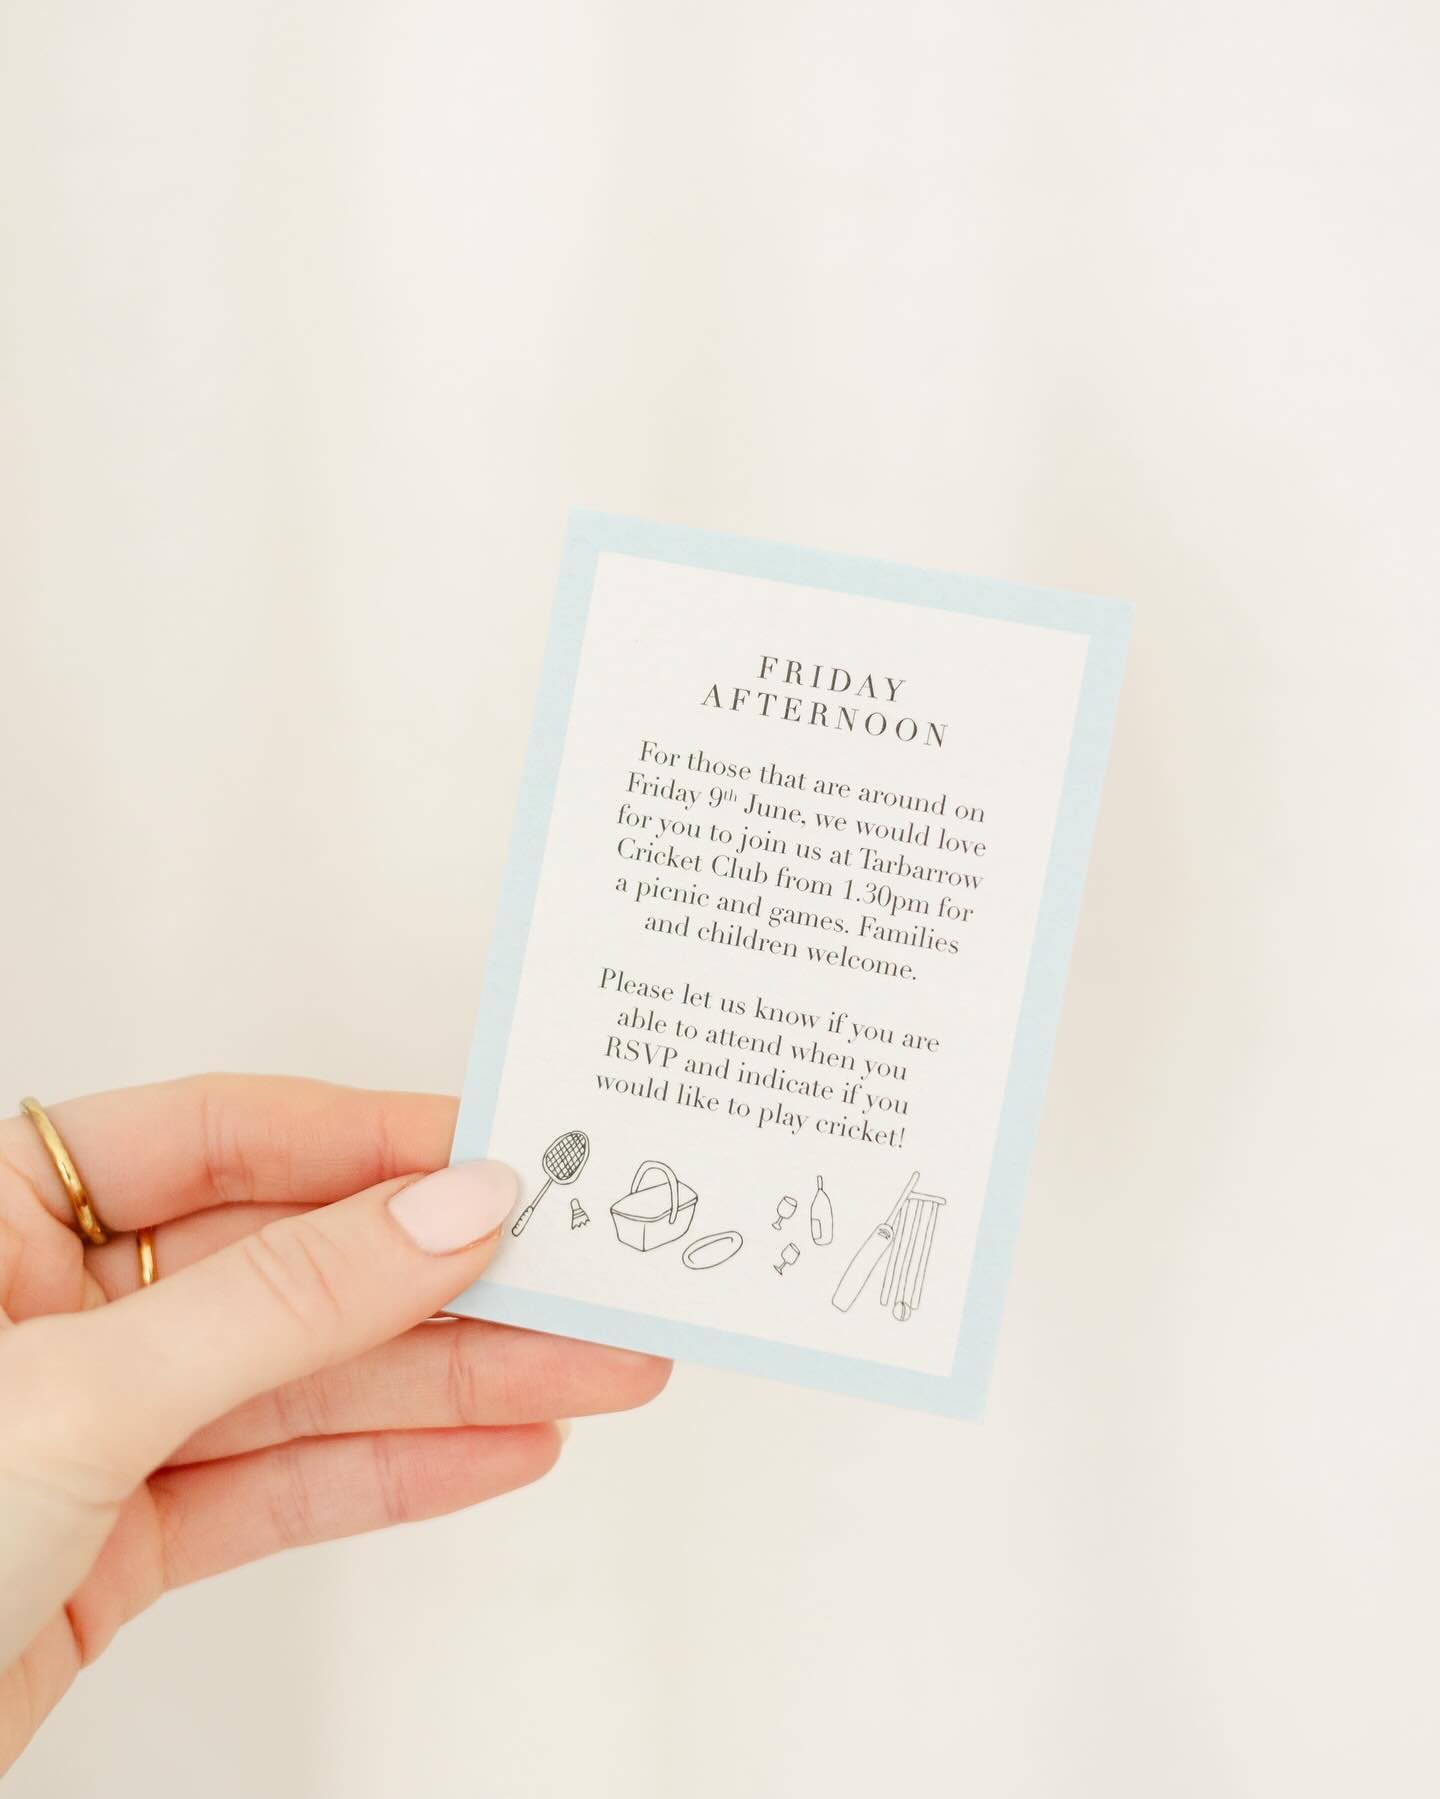 How cute are these dinky little insert cards Suzy and Sam added in with their invitations? With added bespoke illustrations they complete the stationery suite, with a spring blue and floral theme.

All their wedding stationery designed by me - swipe 